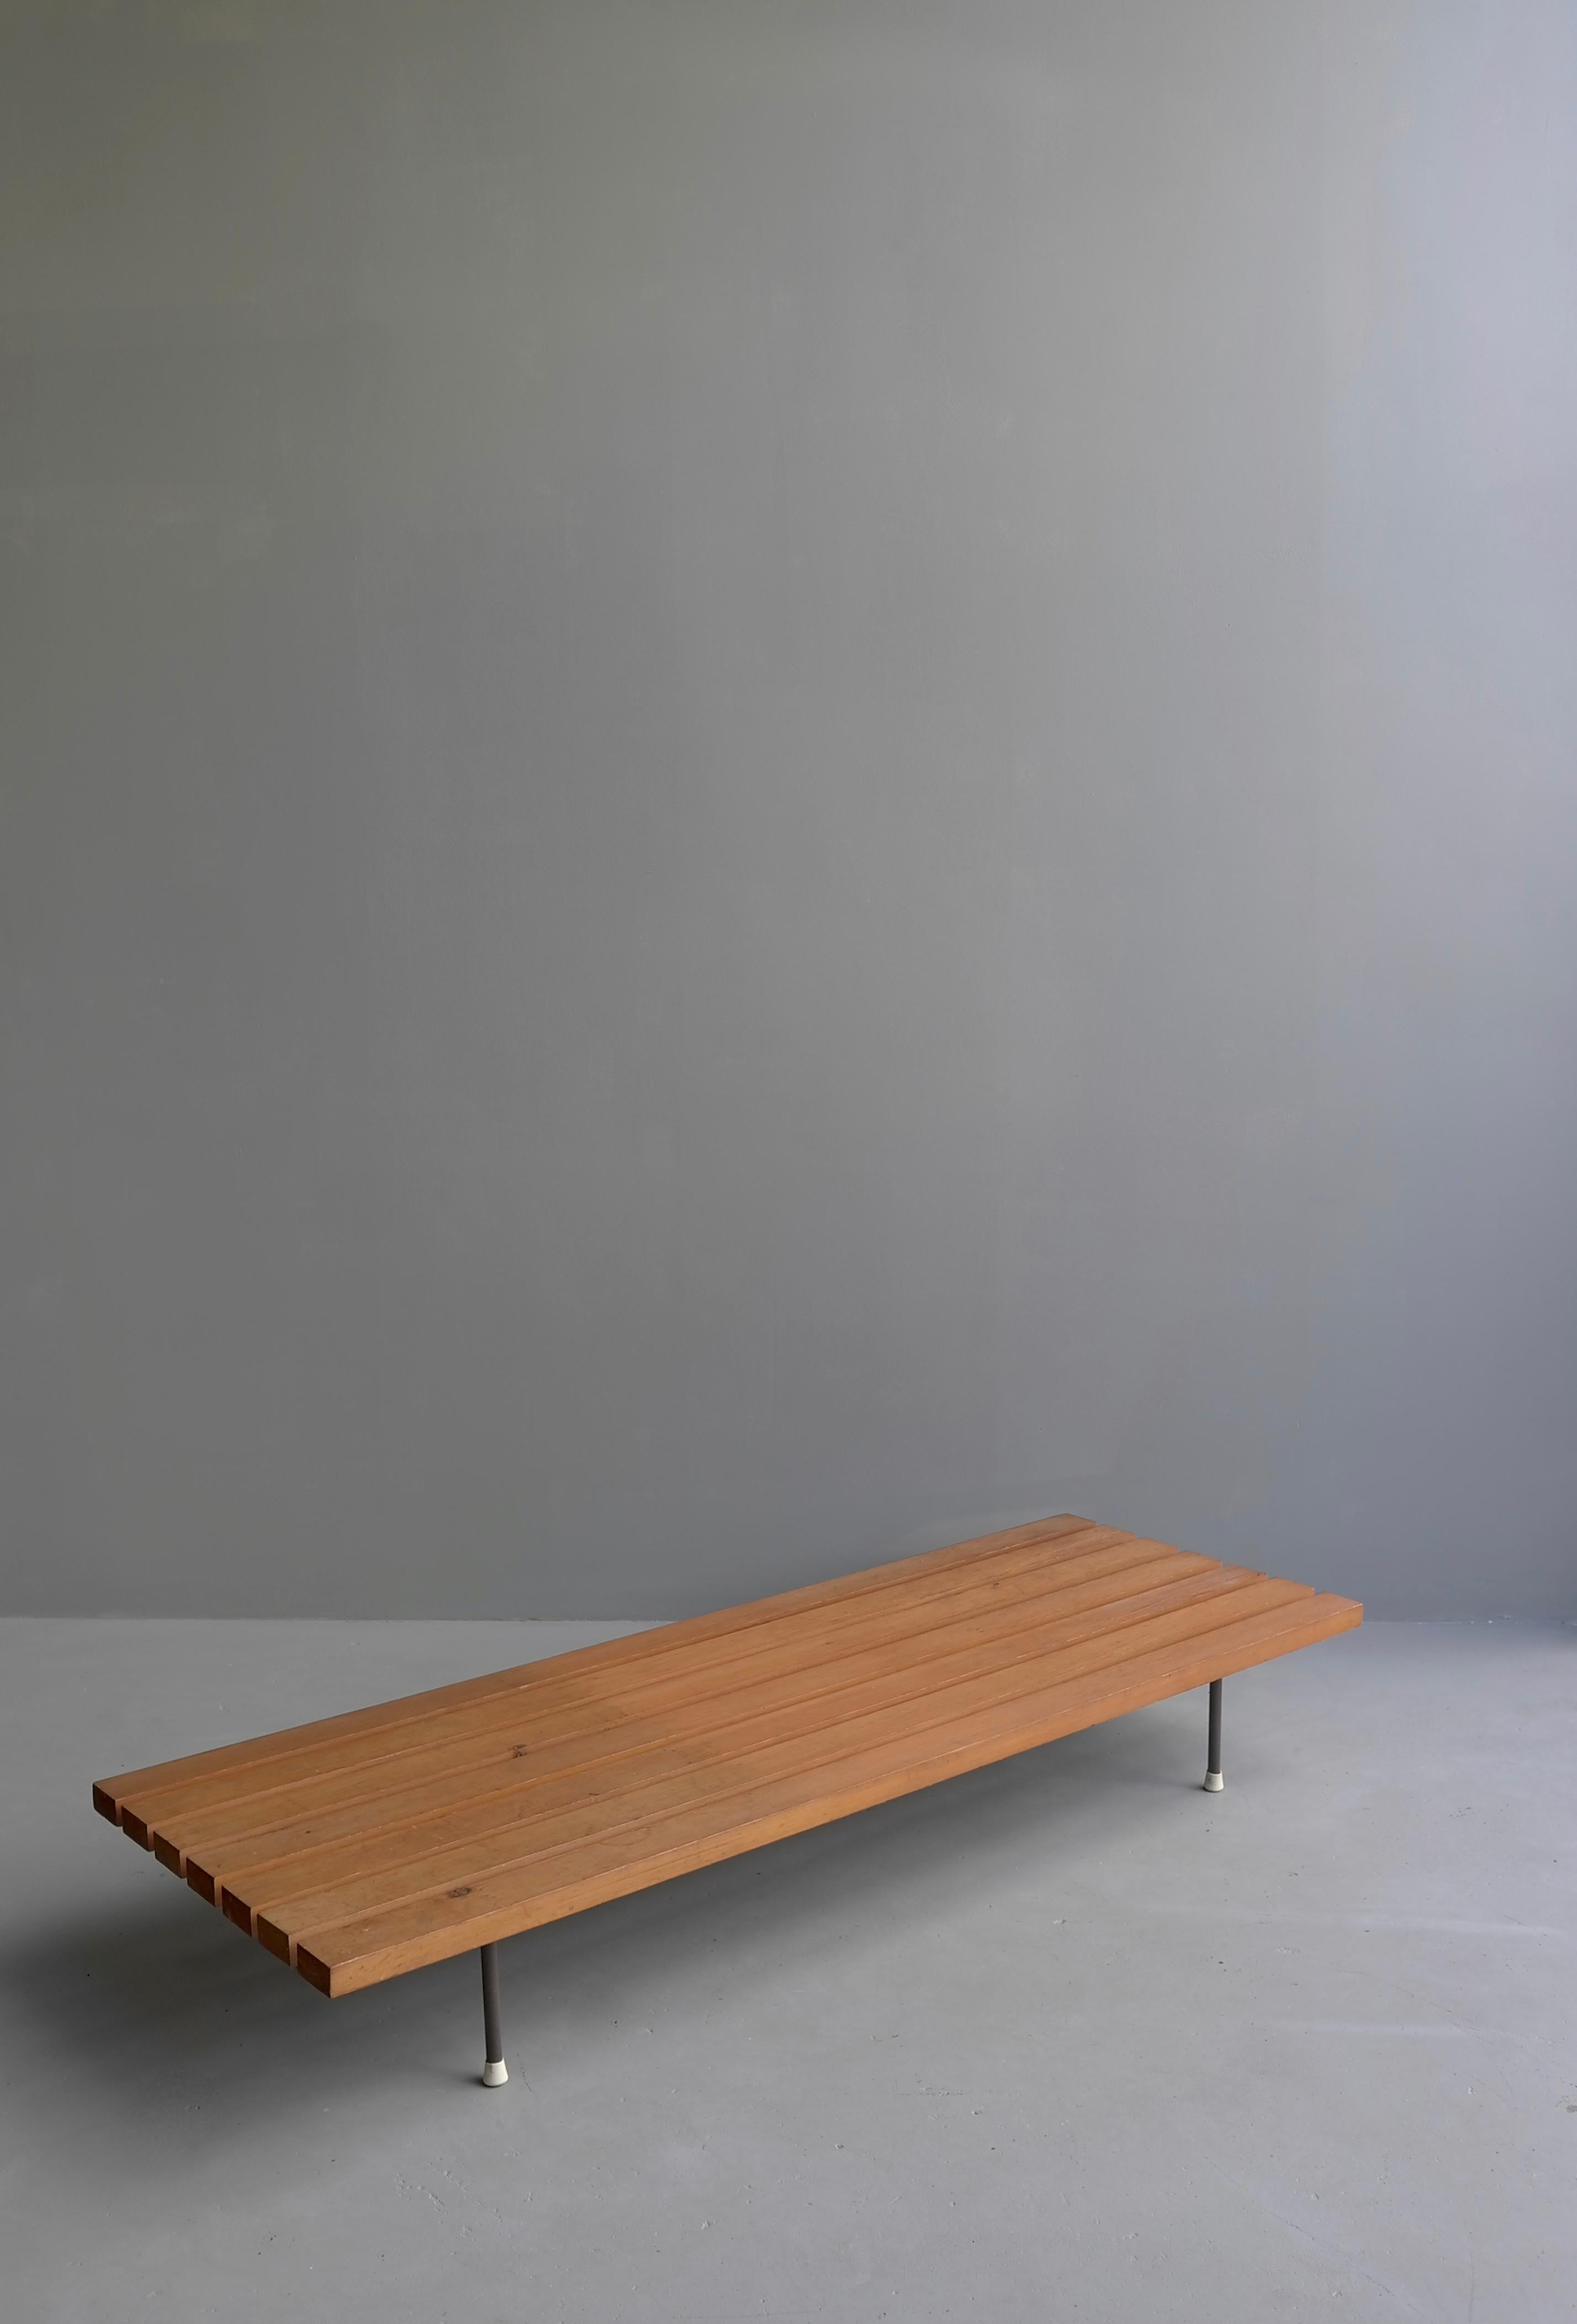 Steel Minimalistic Bench or Daybed Attributed to Wim Rietveld, the Netherlands, 1960s For Sale